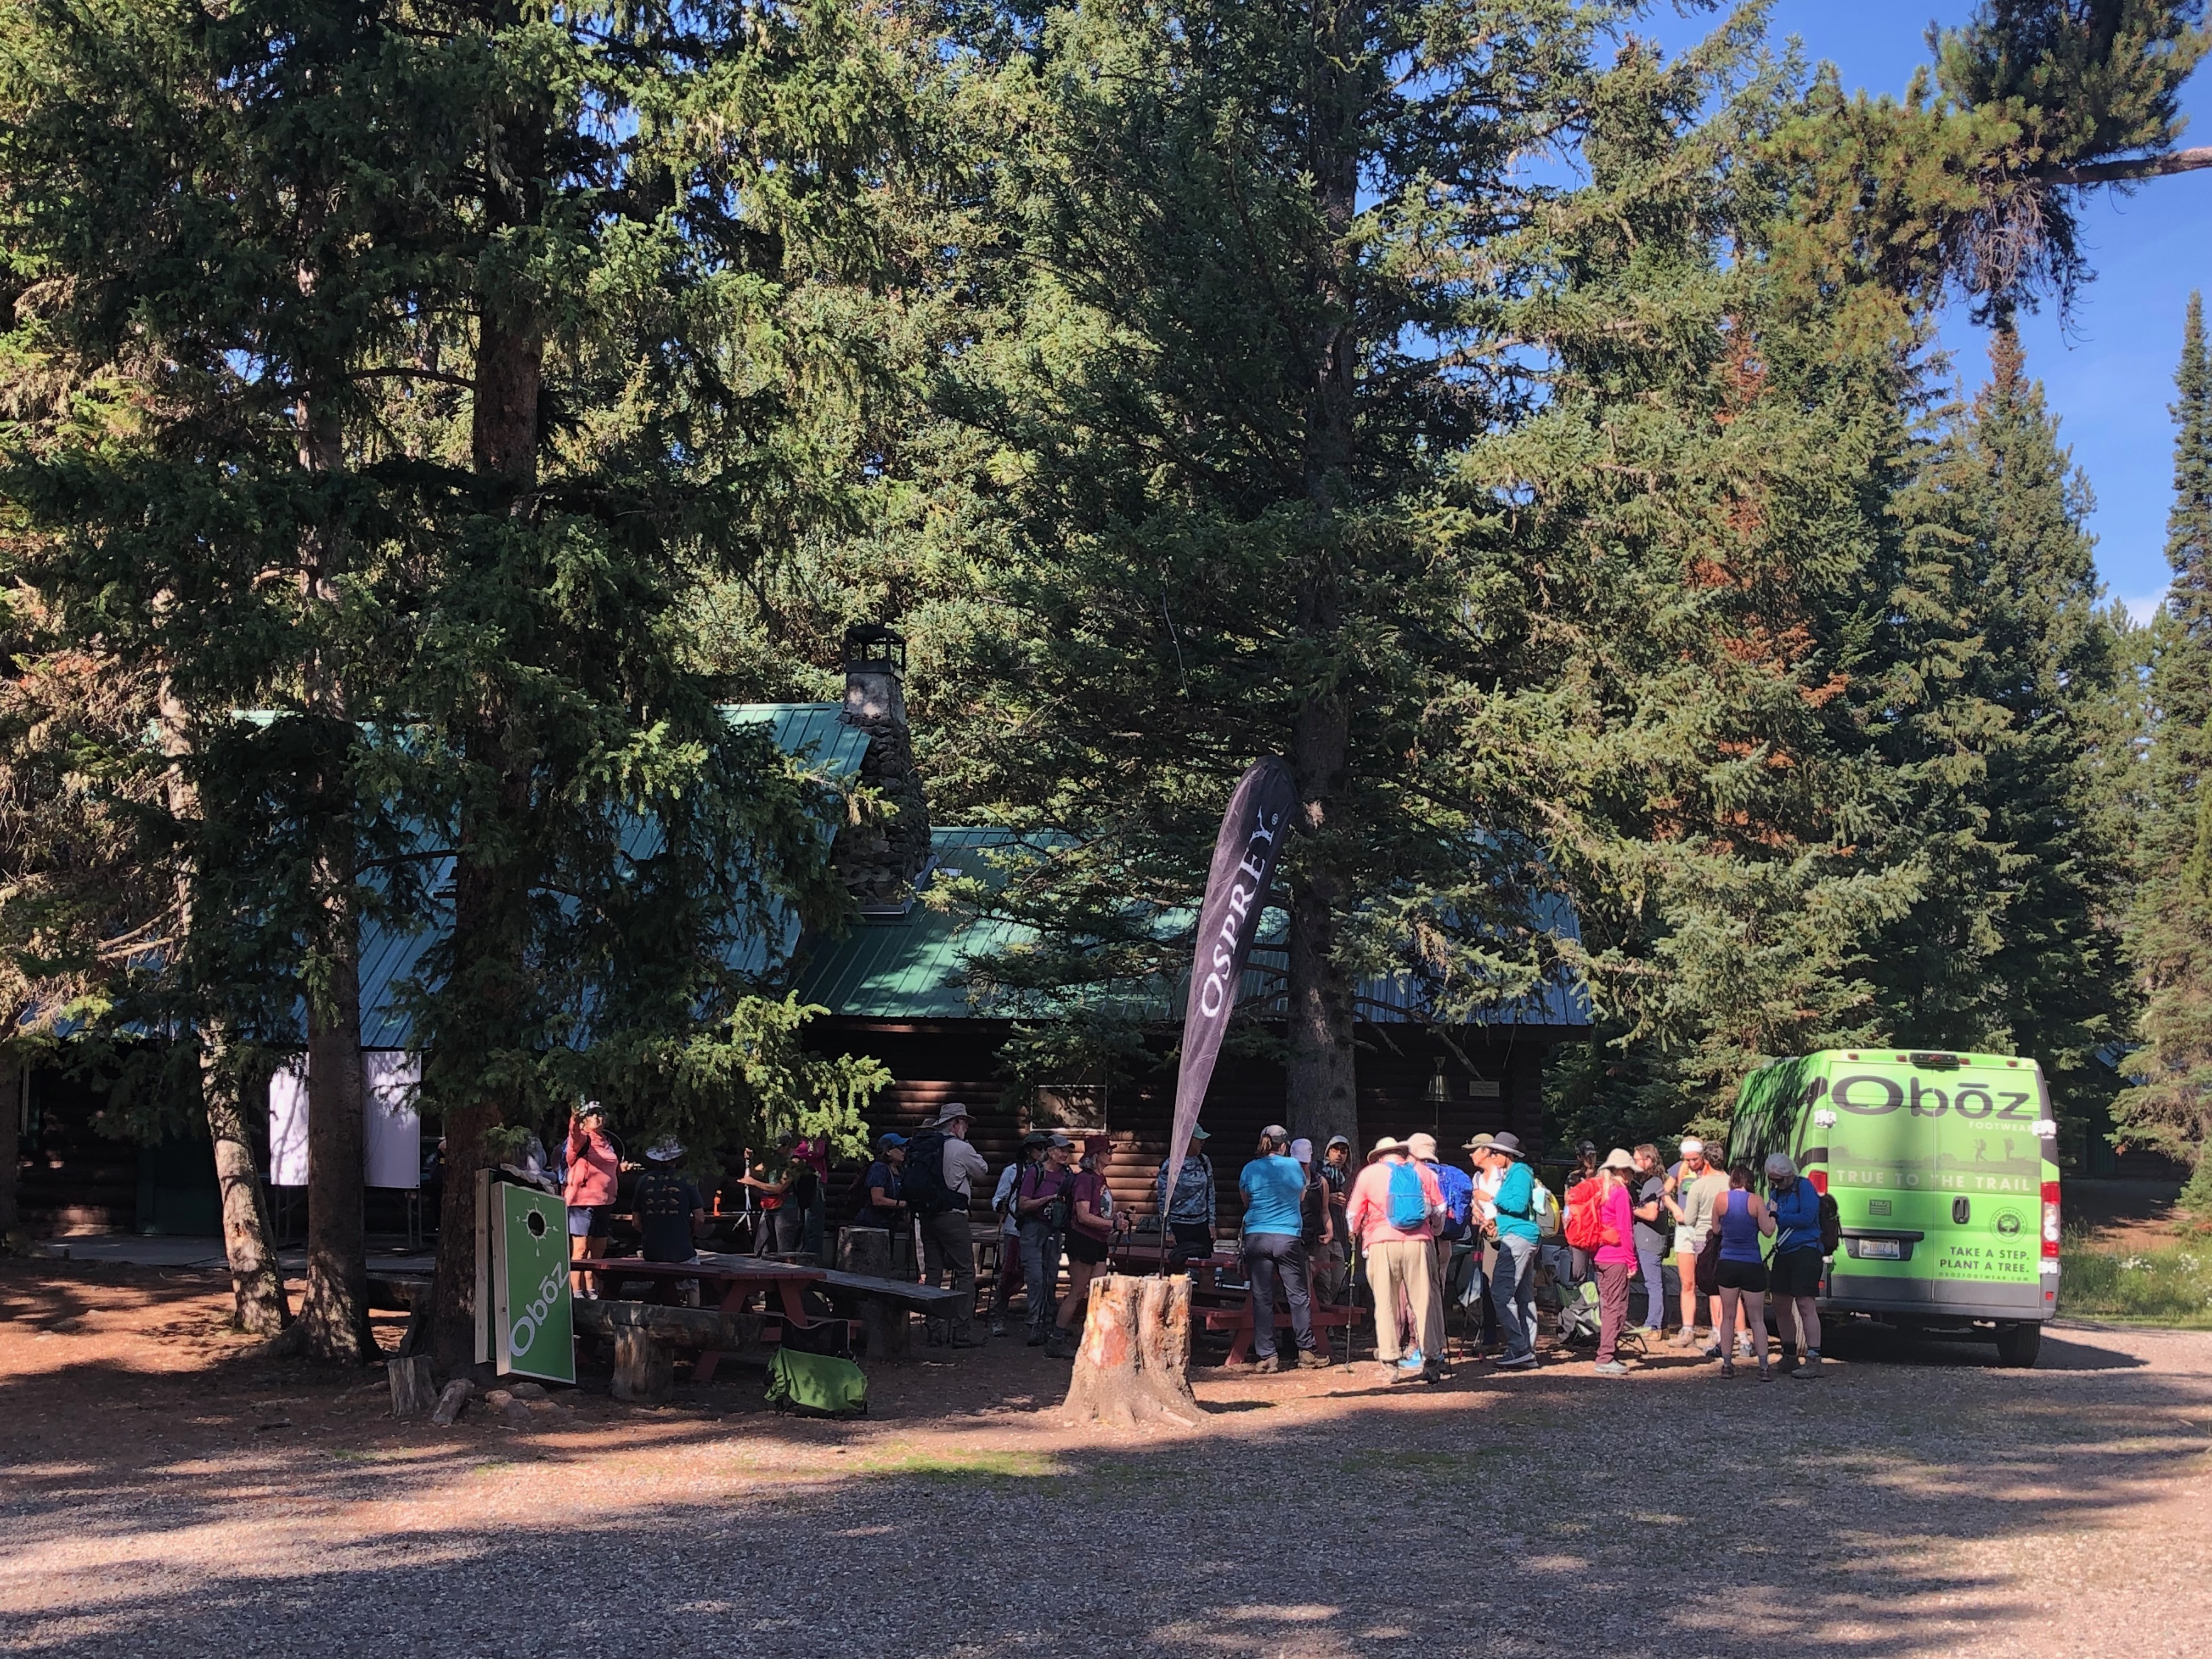 The Hyalite Camp in Bozeman, Montana is a special place for the women to come together